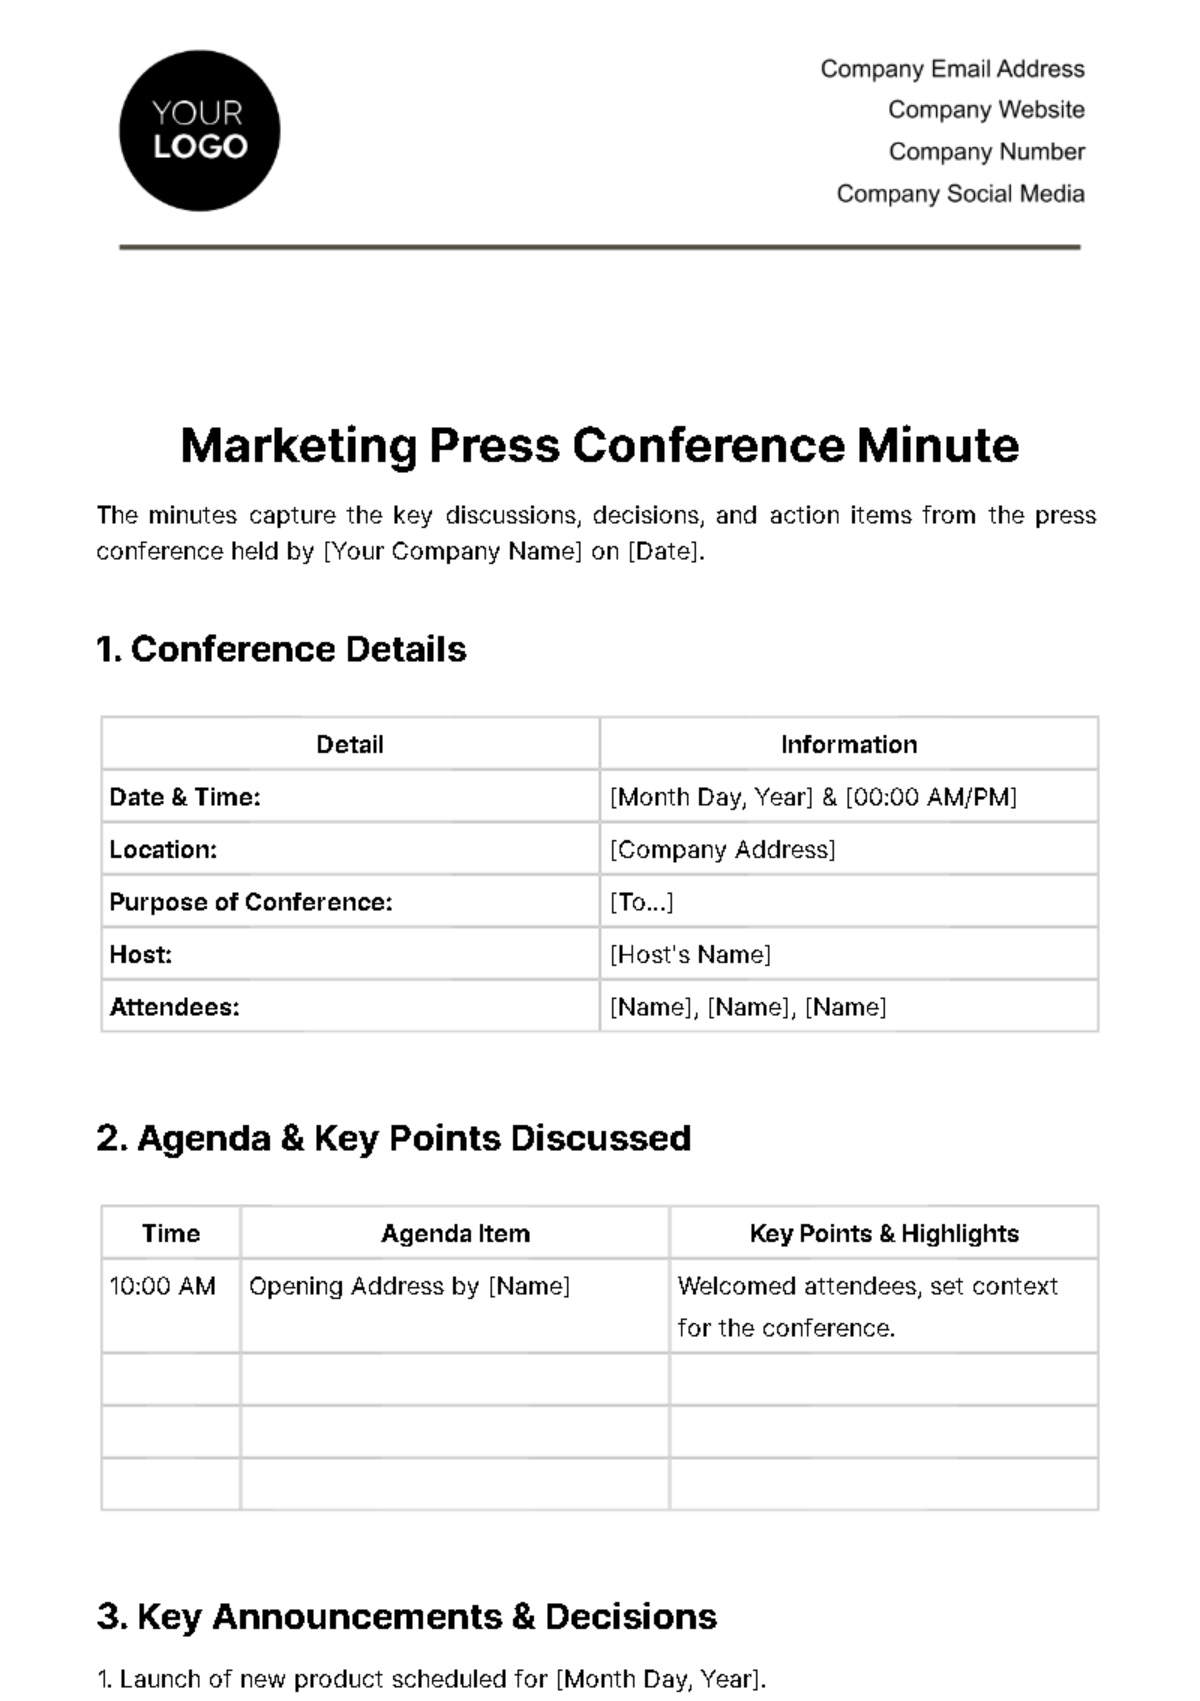 Marketing Press Conference Minute Template